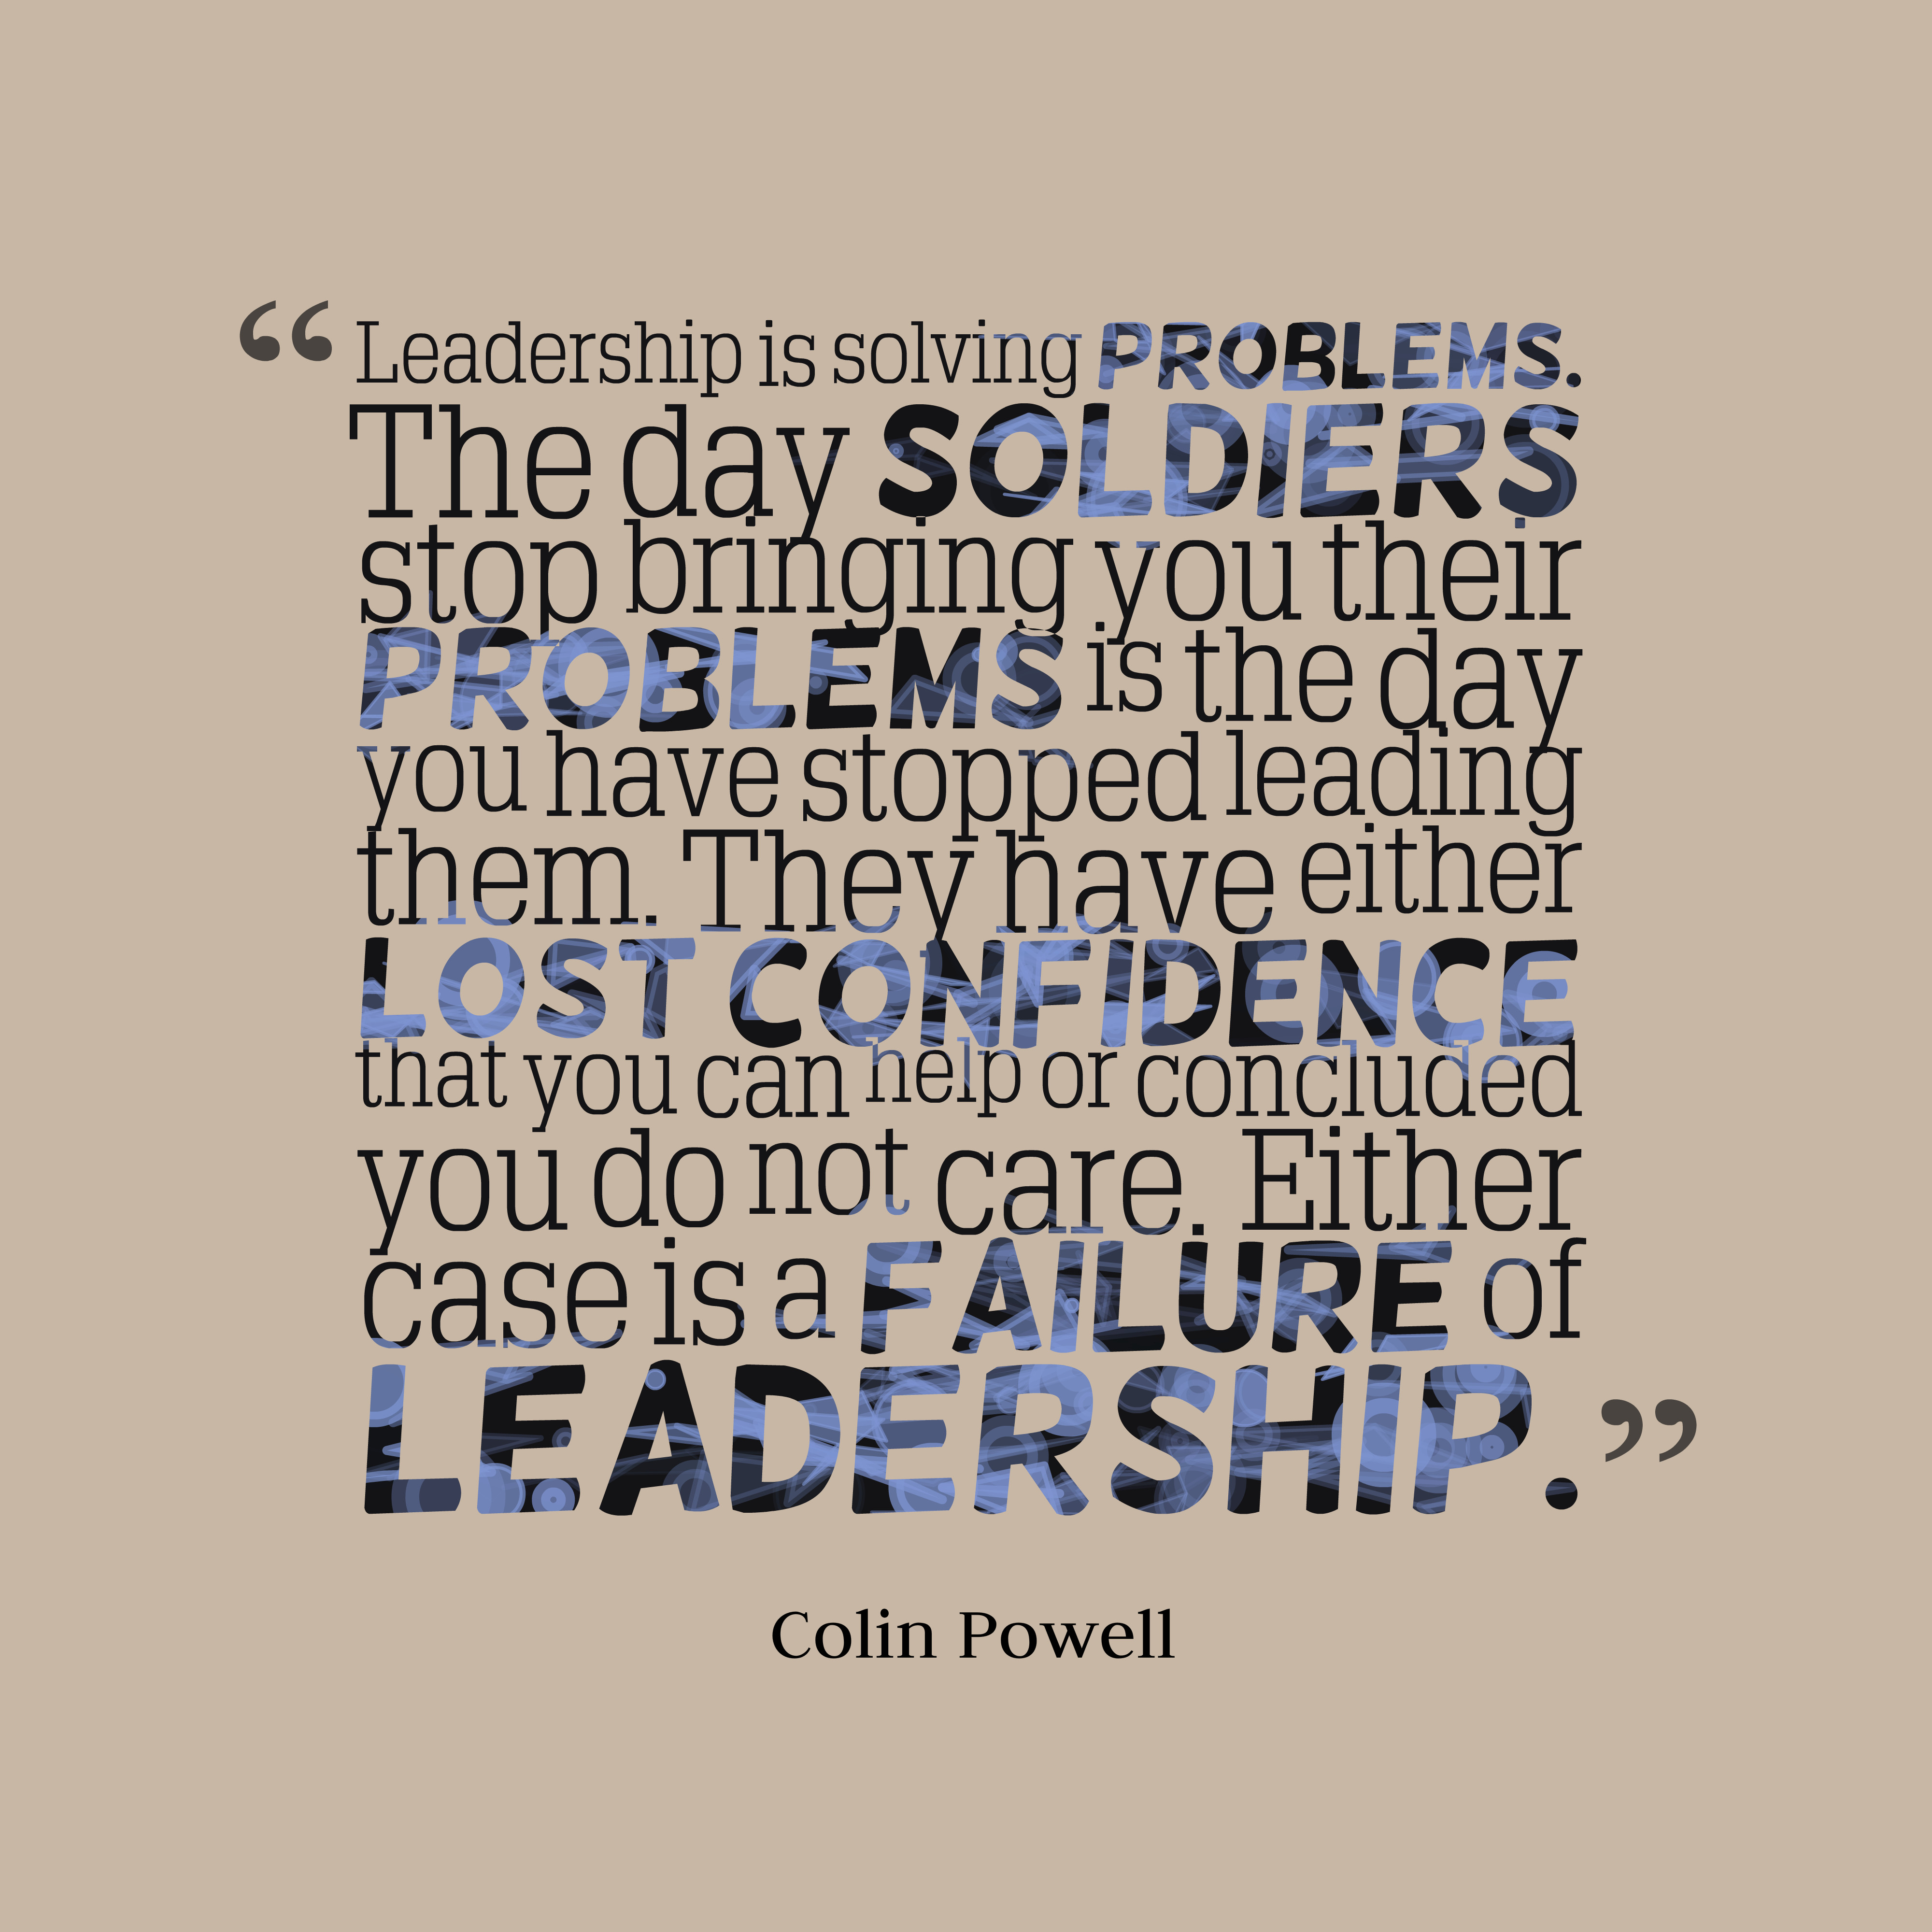 Leadership Quote Of The Day
 Colin Powell quote about leadership